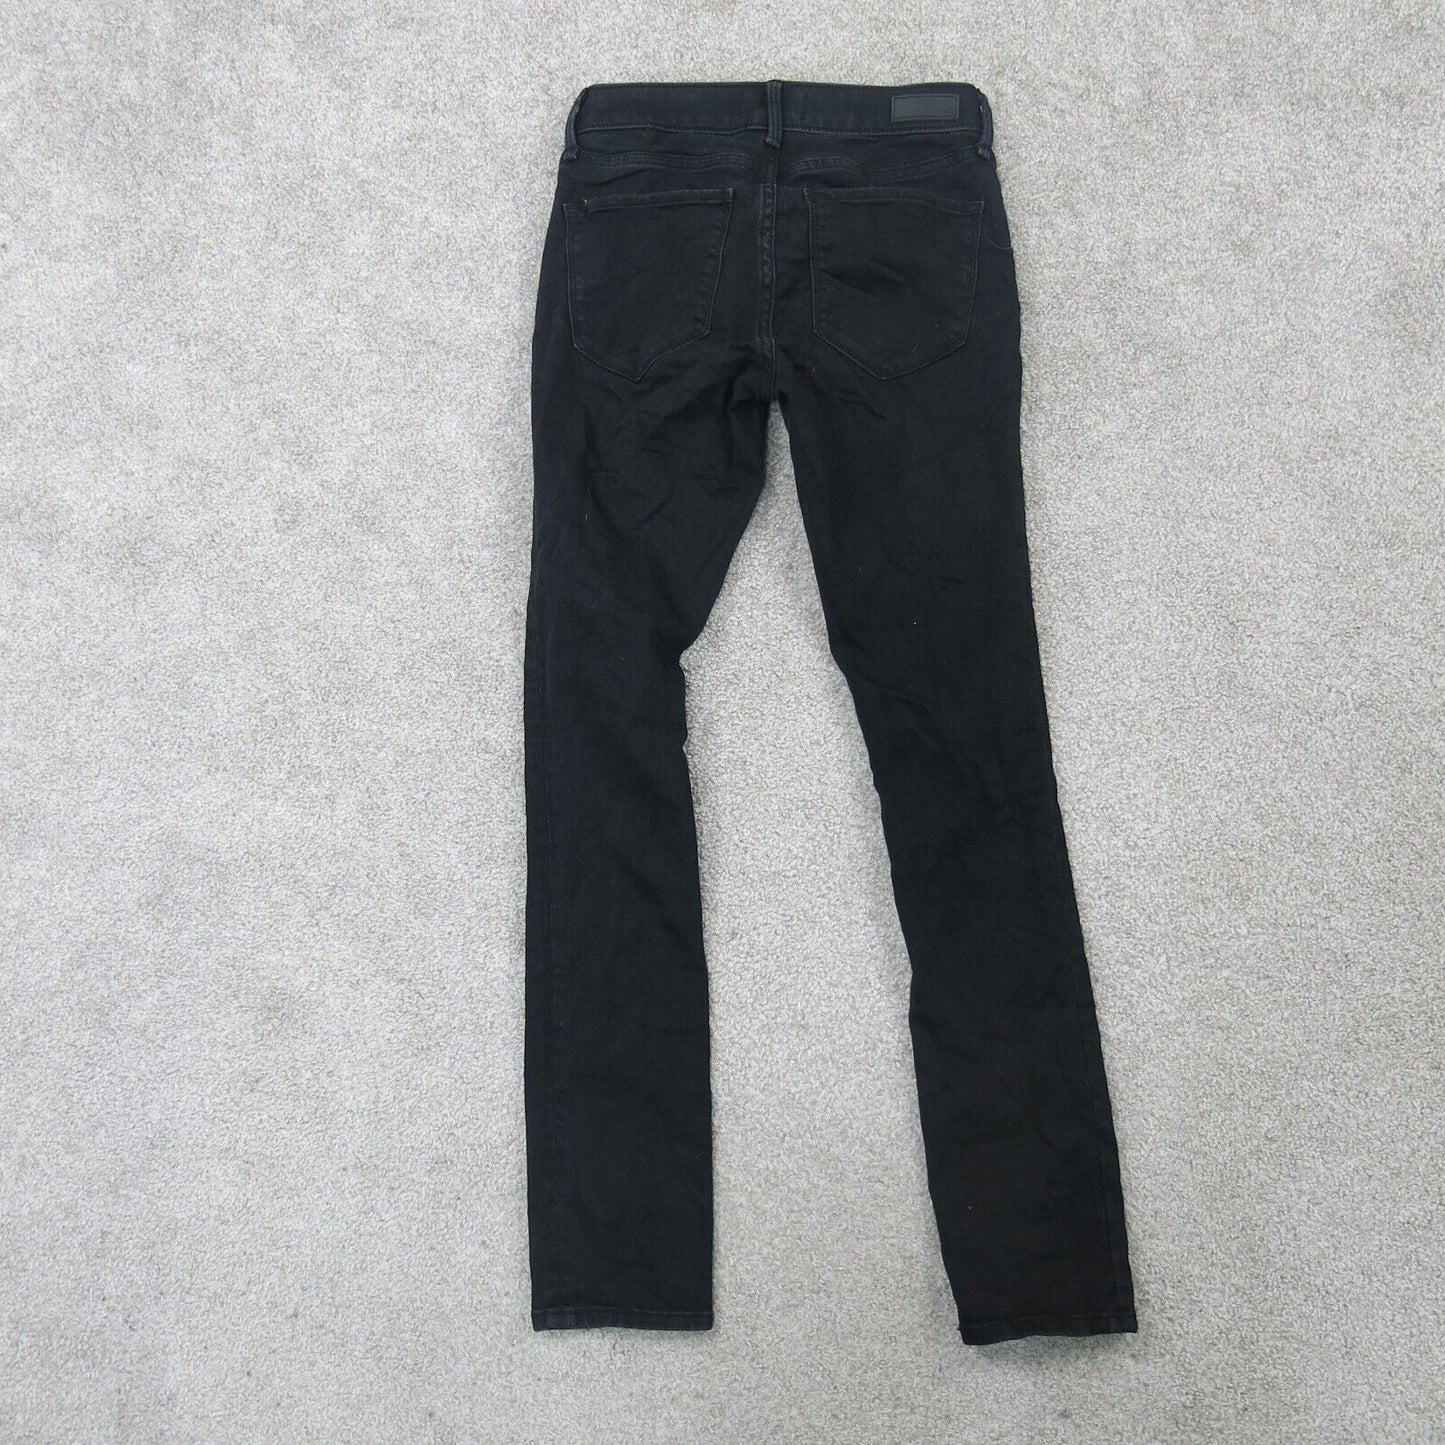 Abercrombie & Fitch Womens Jeans Mid Rise Super Skinny Ankle Black Size 25/0L